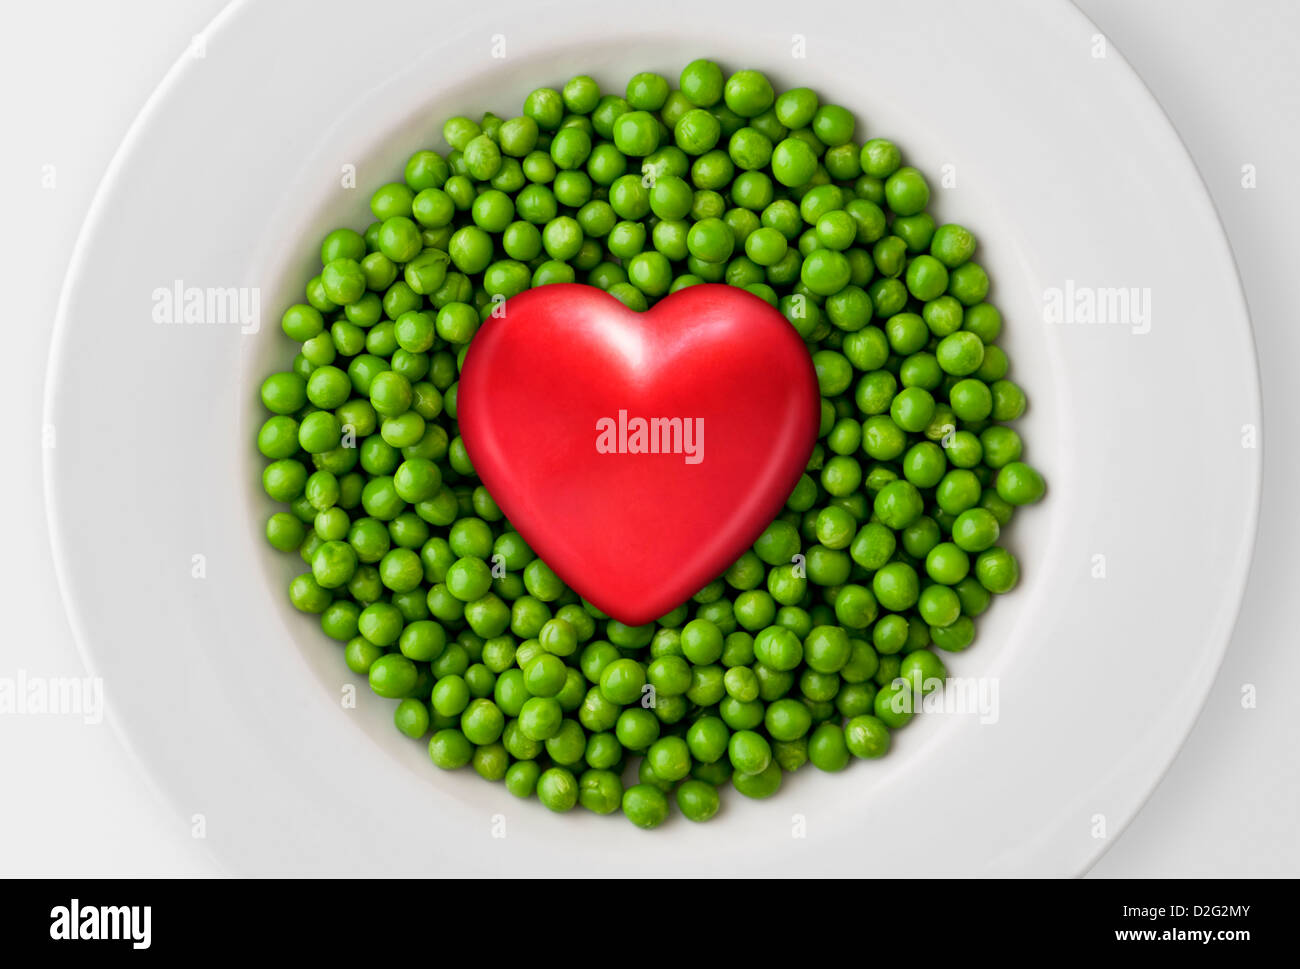 Healthy food concept, a red heart on fresh green peas Stock Photo